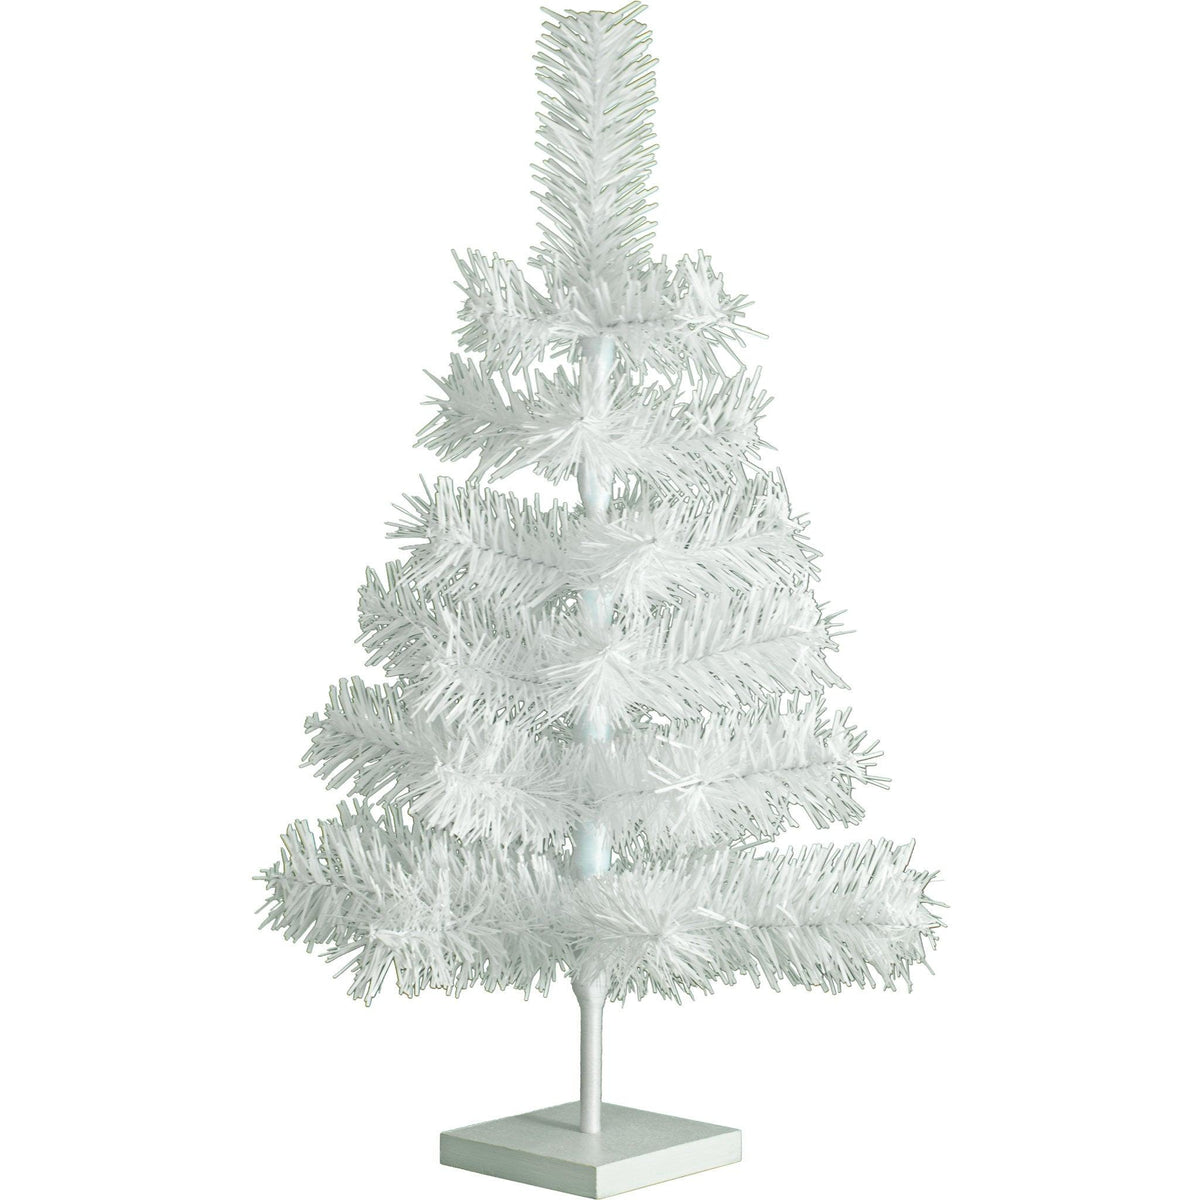 2FT Tall Mini White Tinsel Christmas Trees come unlit and undecorated.  On sale now at leedisplay.com